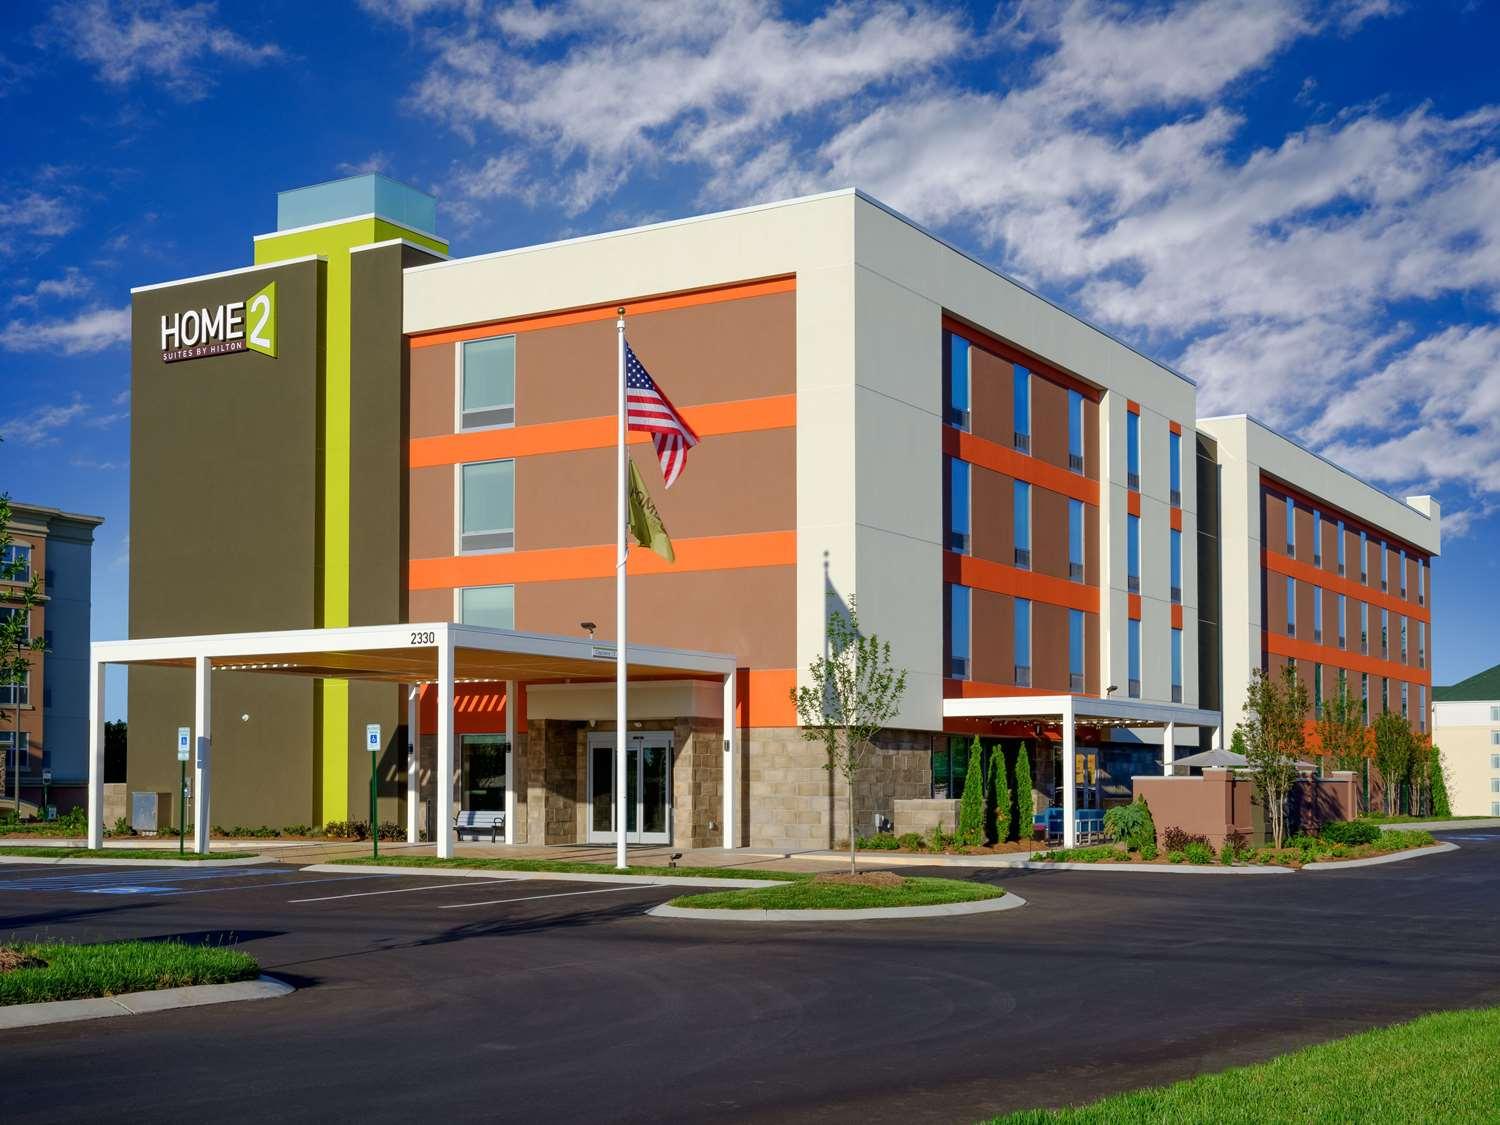 Home2 Suites by Hilton Chattanooga Hamilton Place in Chattanooga, TN